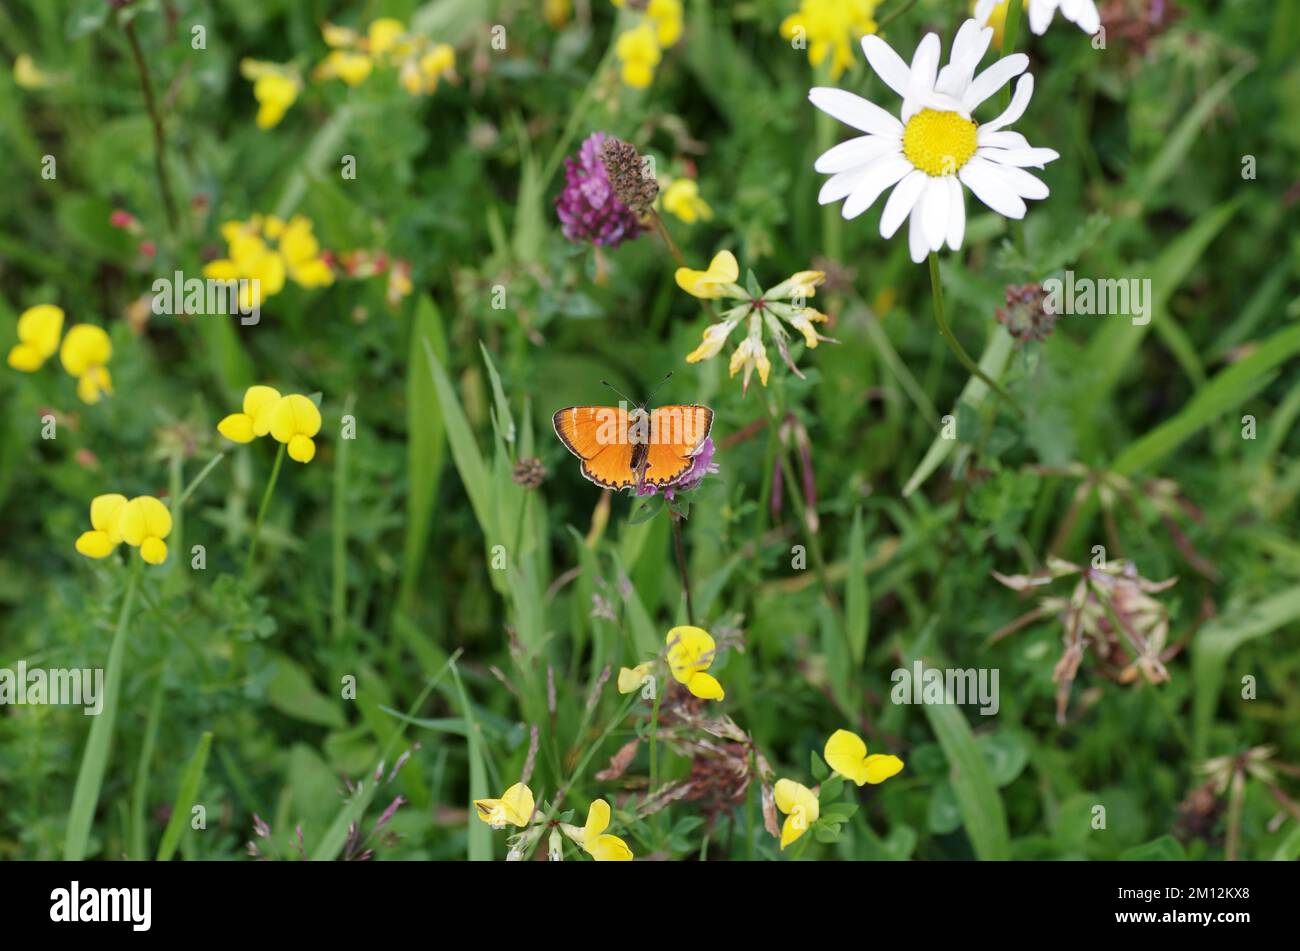 Scarce copper (Lycaena virgaureae), male, meadow, flowers, nature, the orange-red Ducat butterfly sits alone in a flower meadow, Germany, Europe Stock Photo